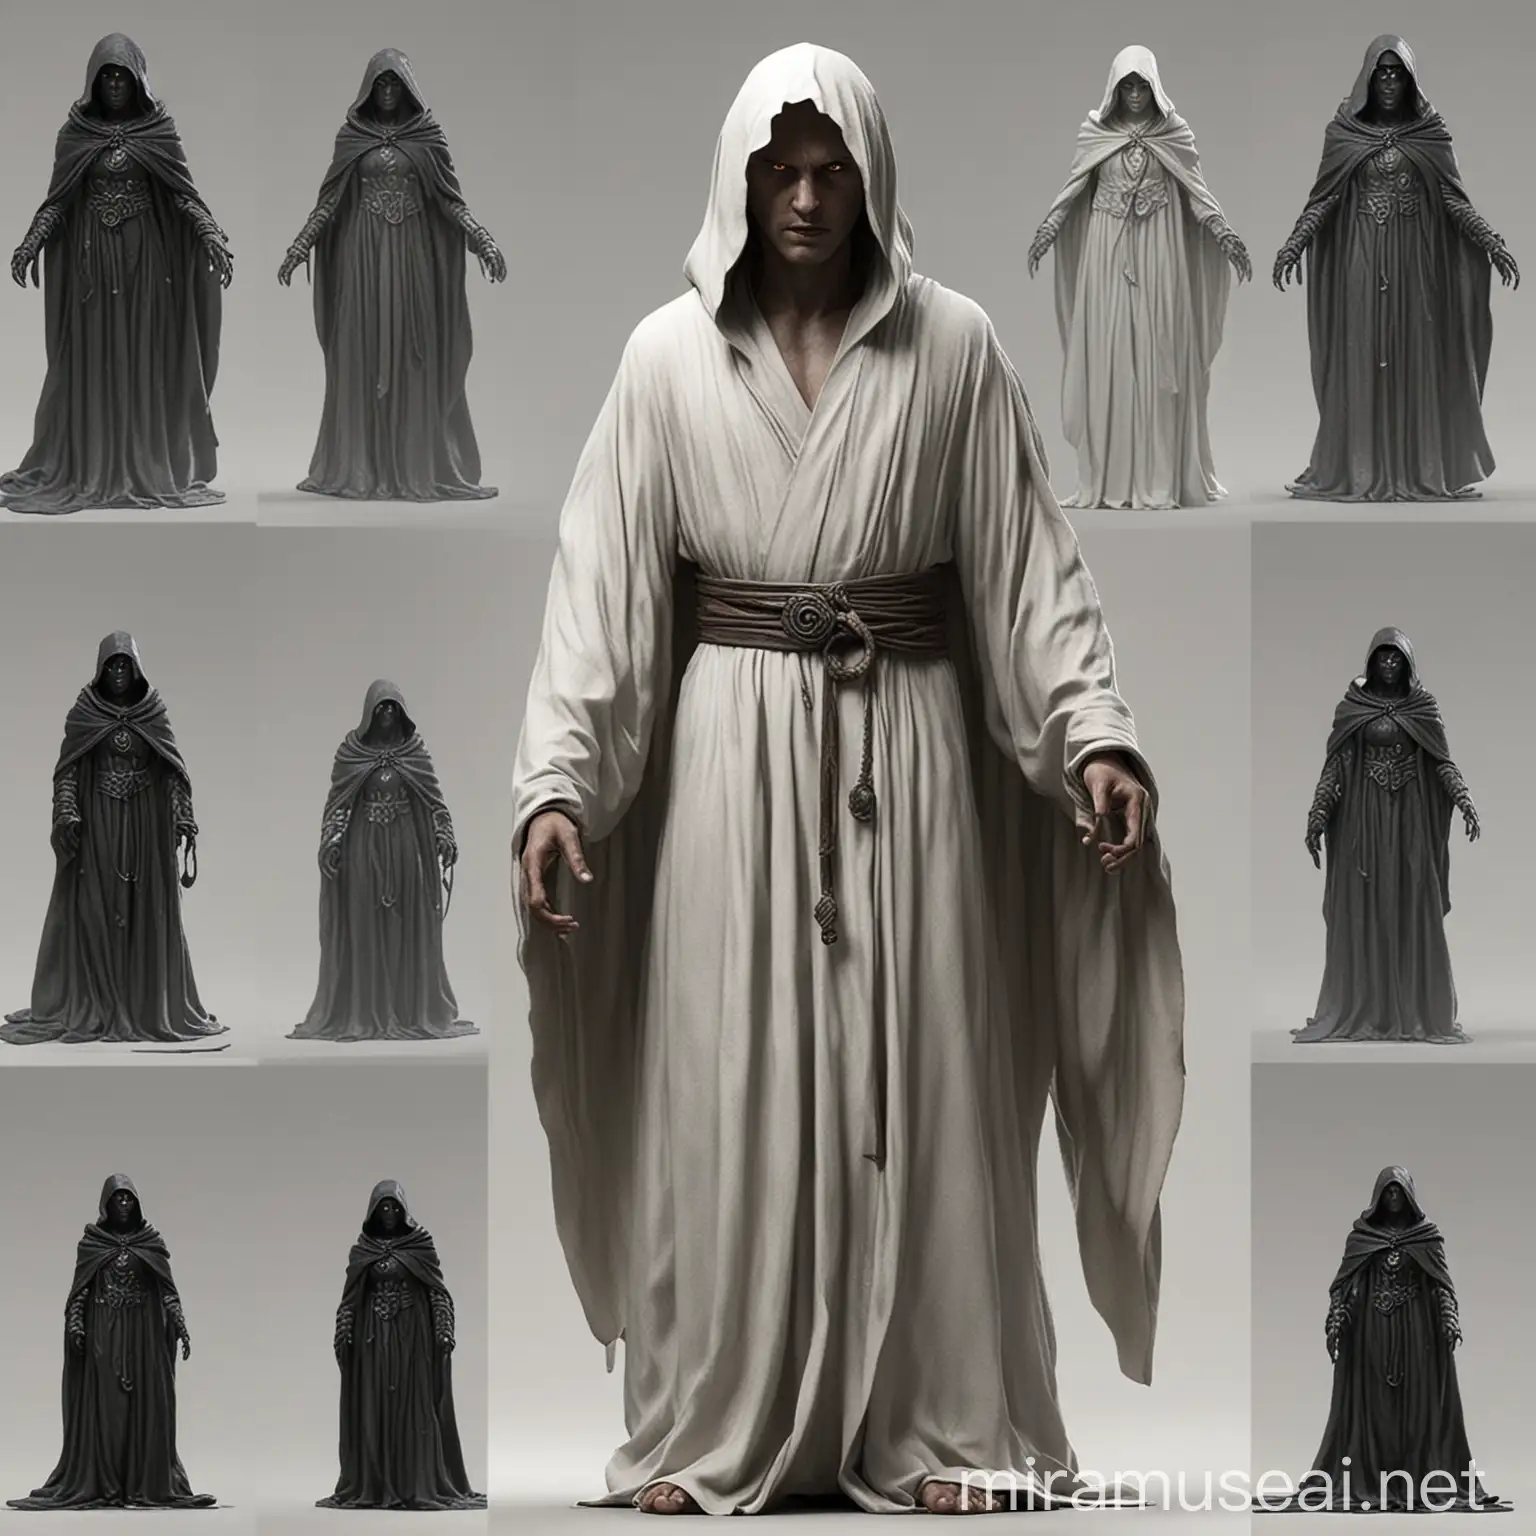 robed figure faced away from camera. also generate fantasy characters with turns (from the camera, into the camera, to the side of the camera, and so on). These figures should be full-length on a white background and possibly wear a black robe.